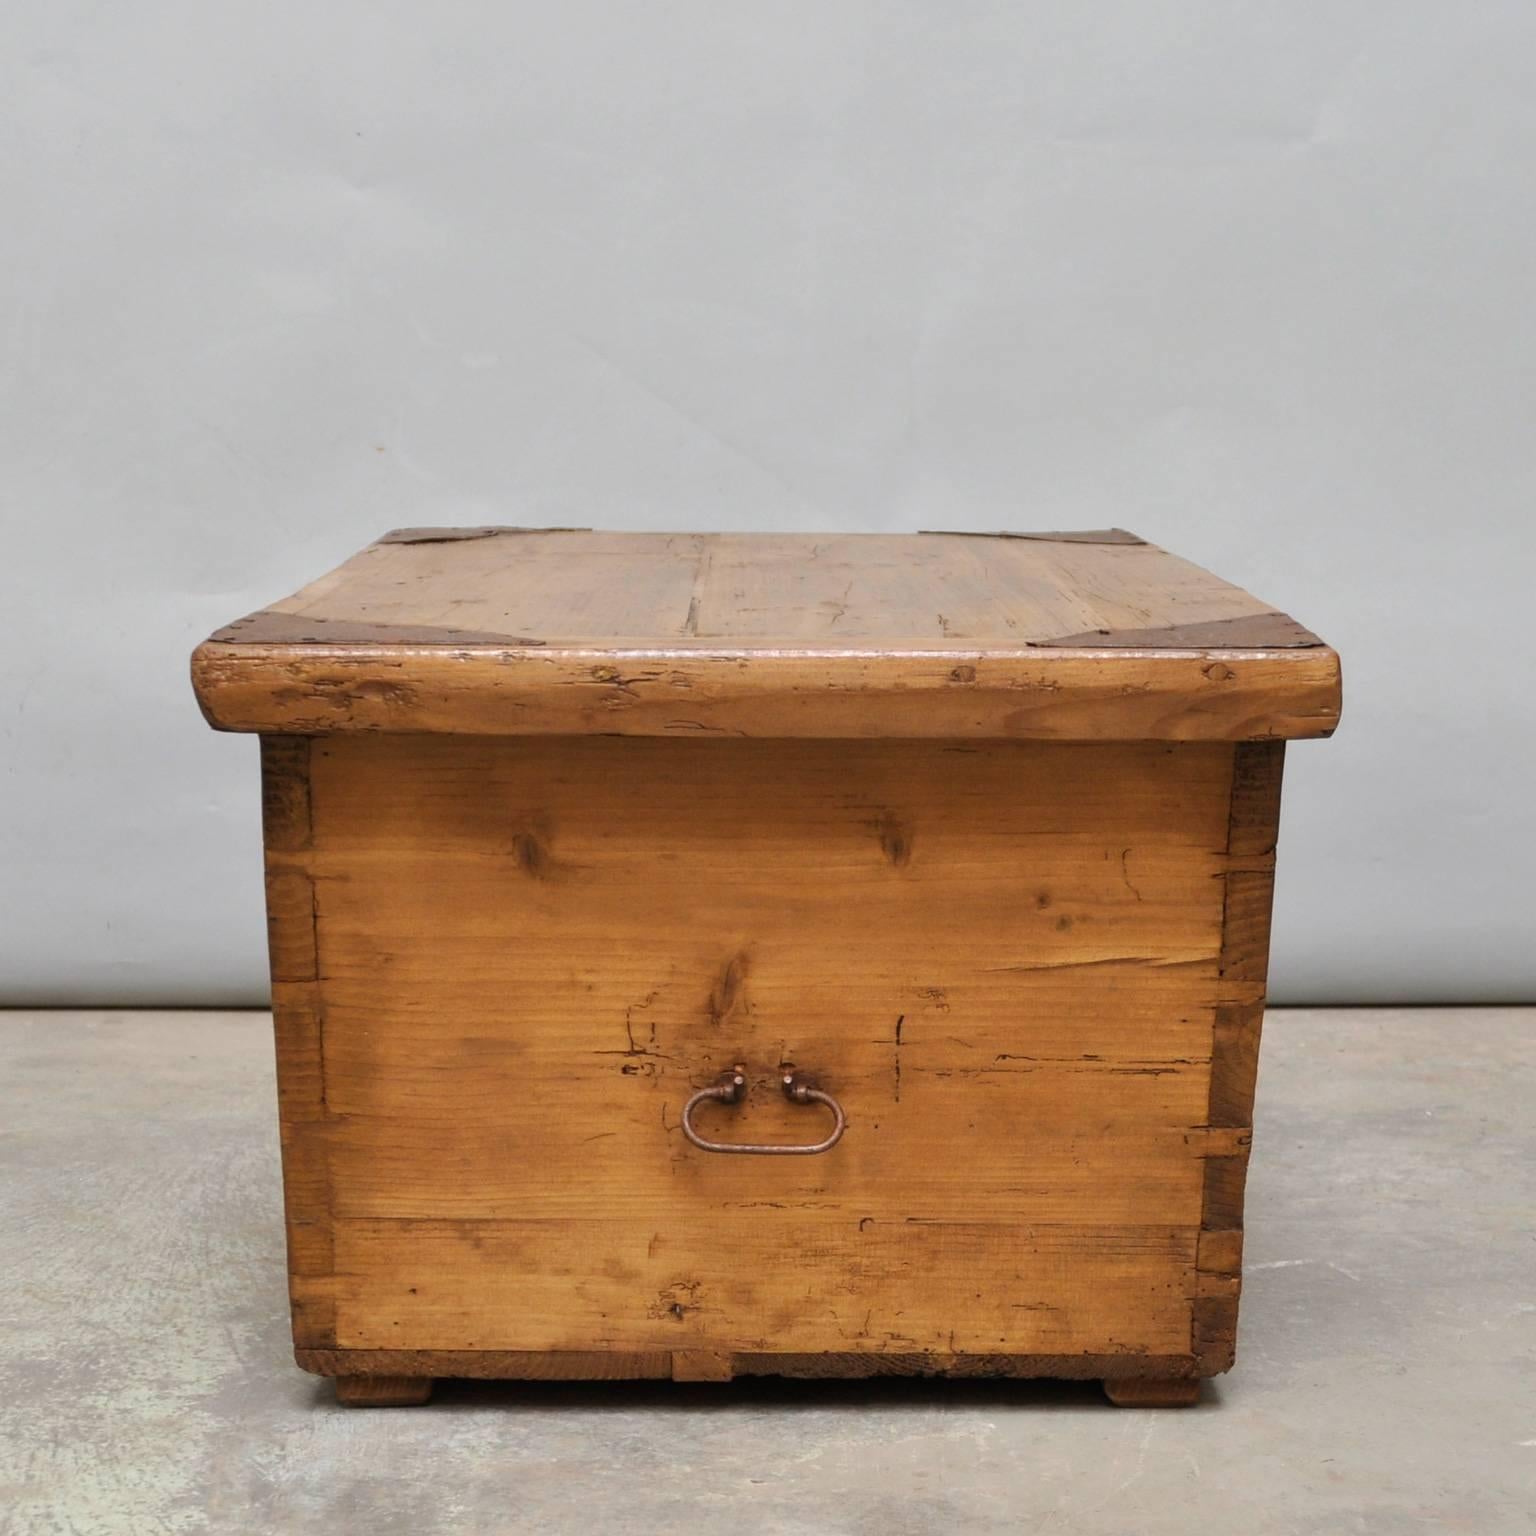 This wooden chest was made for a wagon. That explains the unusual shape. The chest is made of pine and iron with a wax finish. It was made in the 1930s.